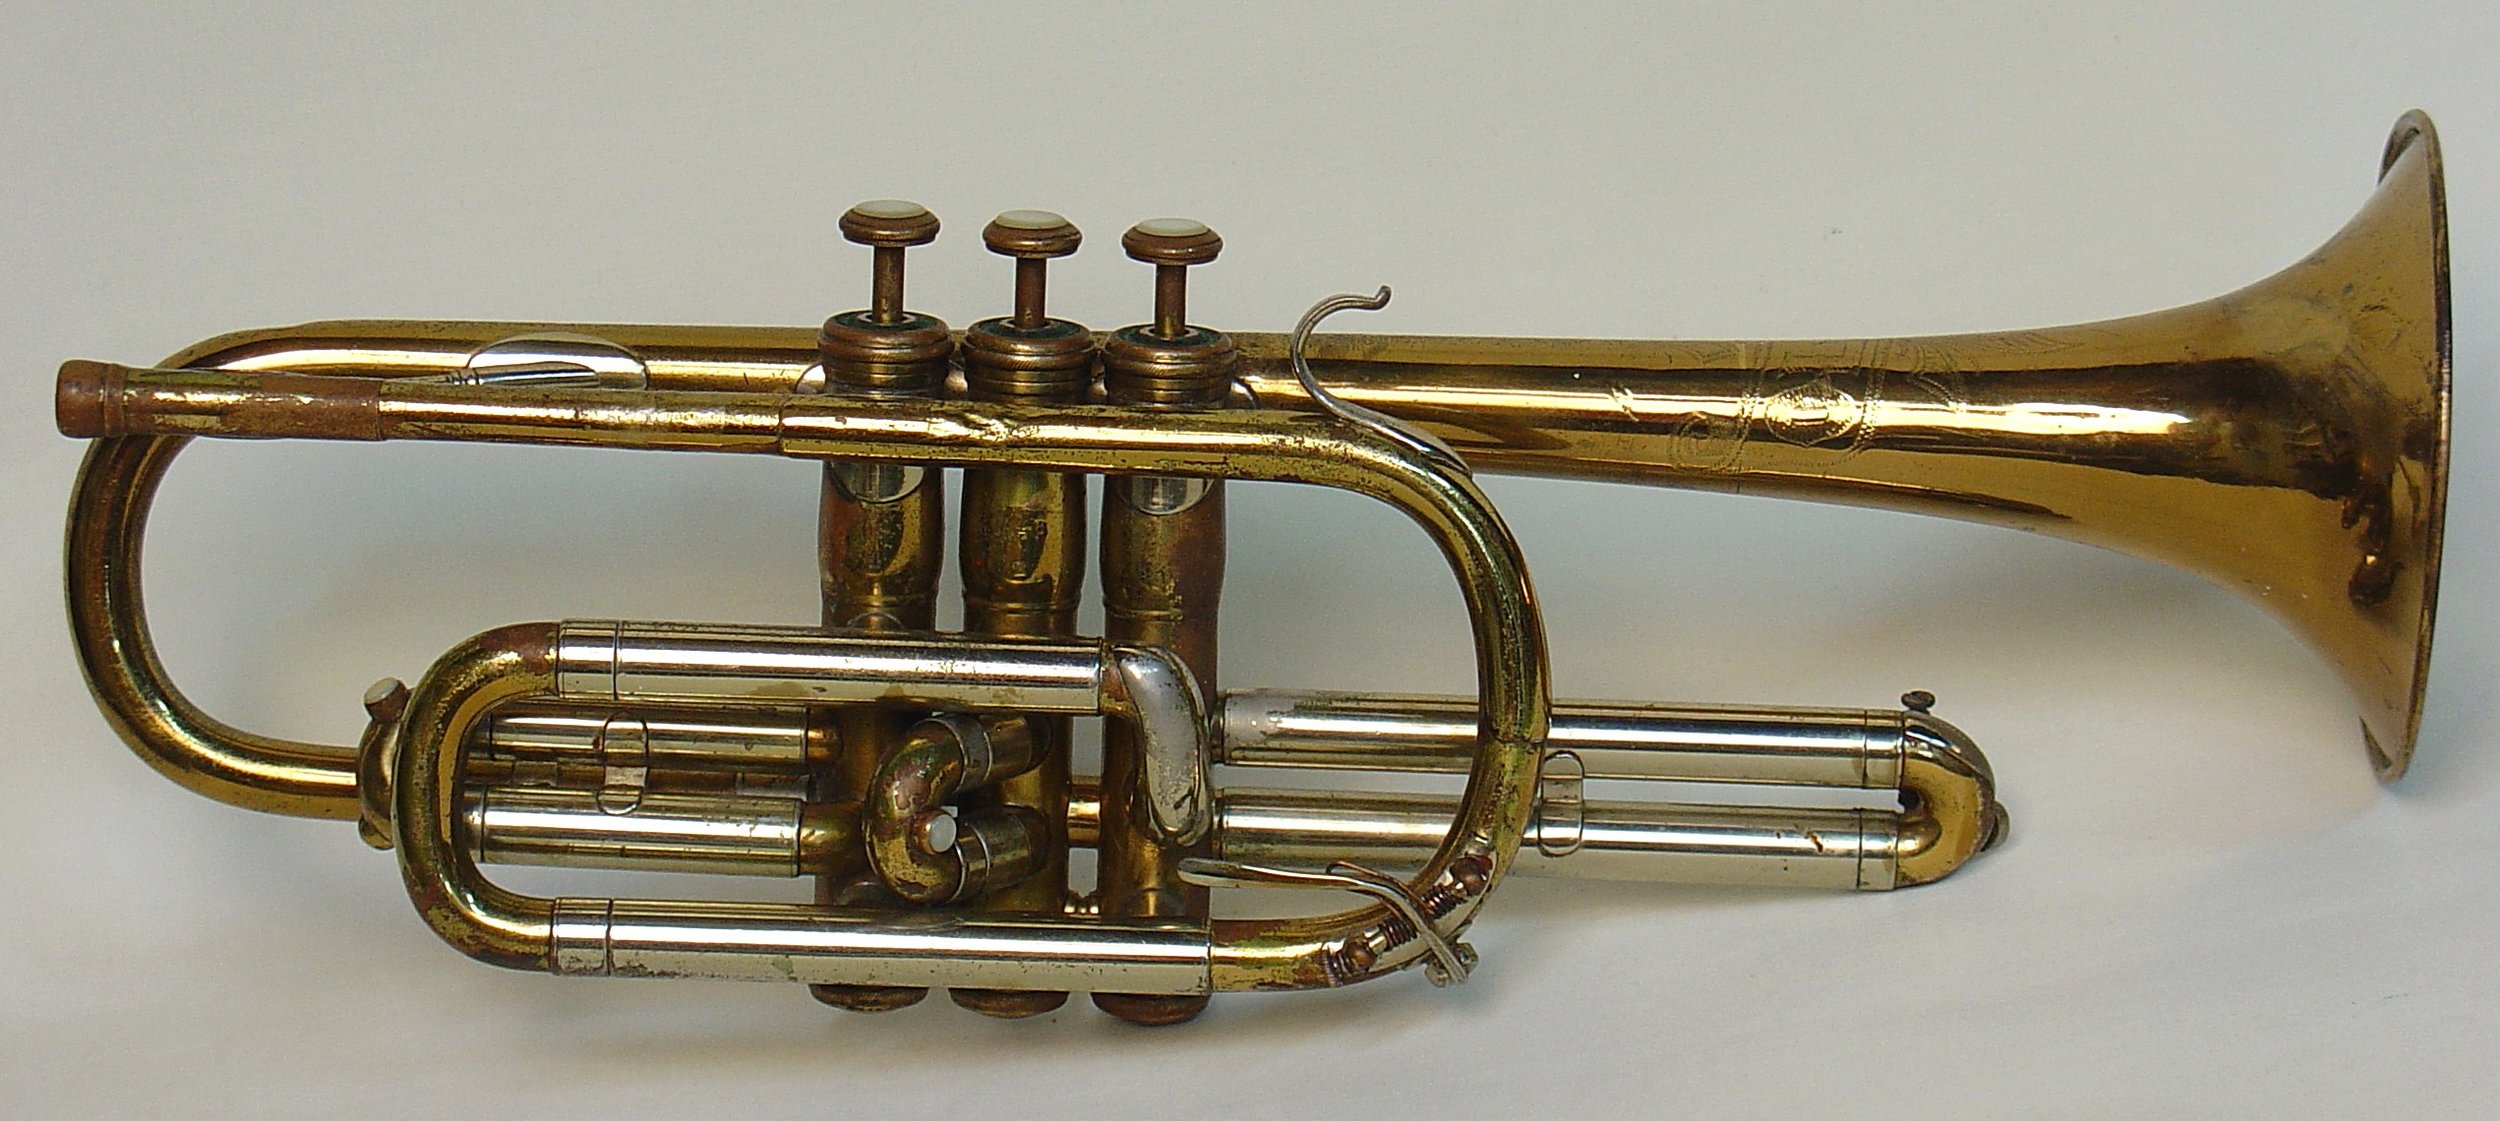 Early Olds Cornet